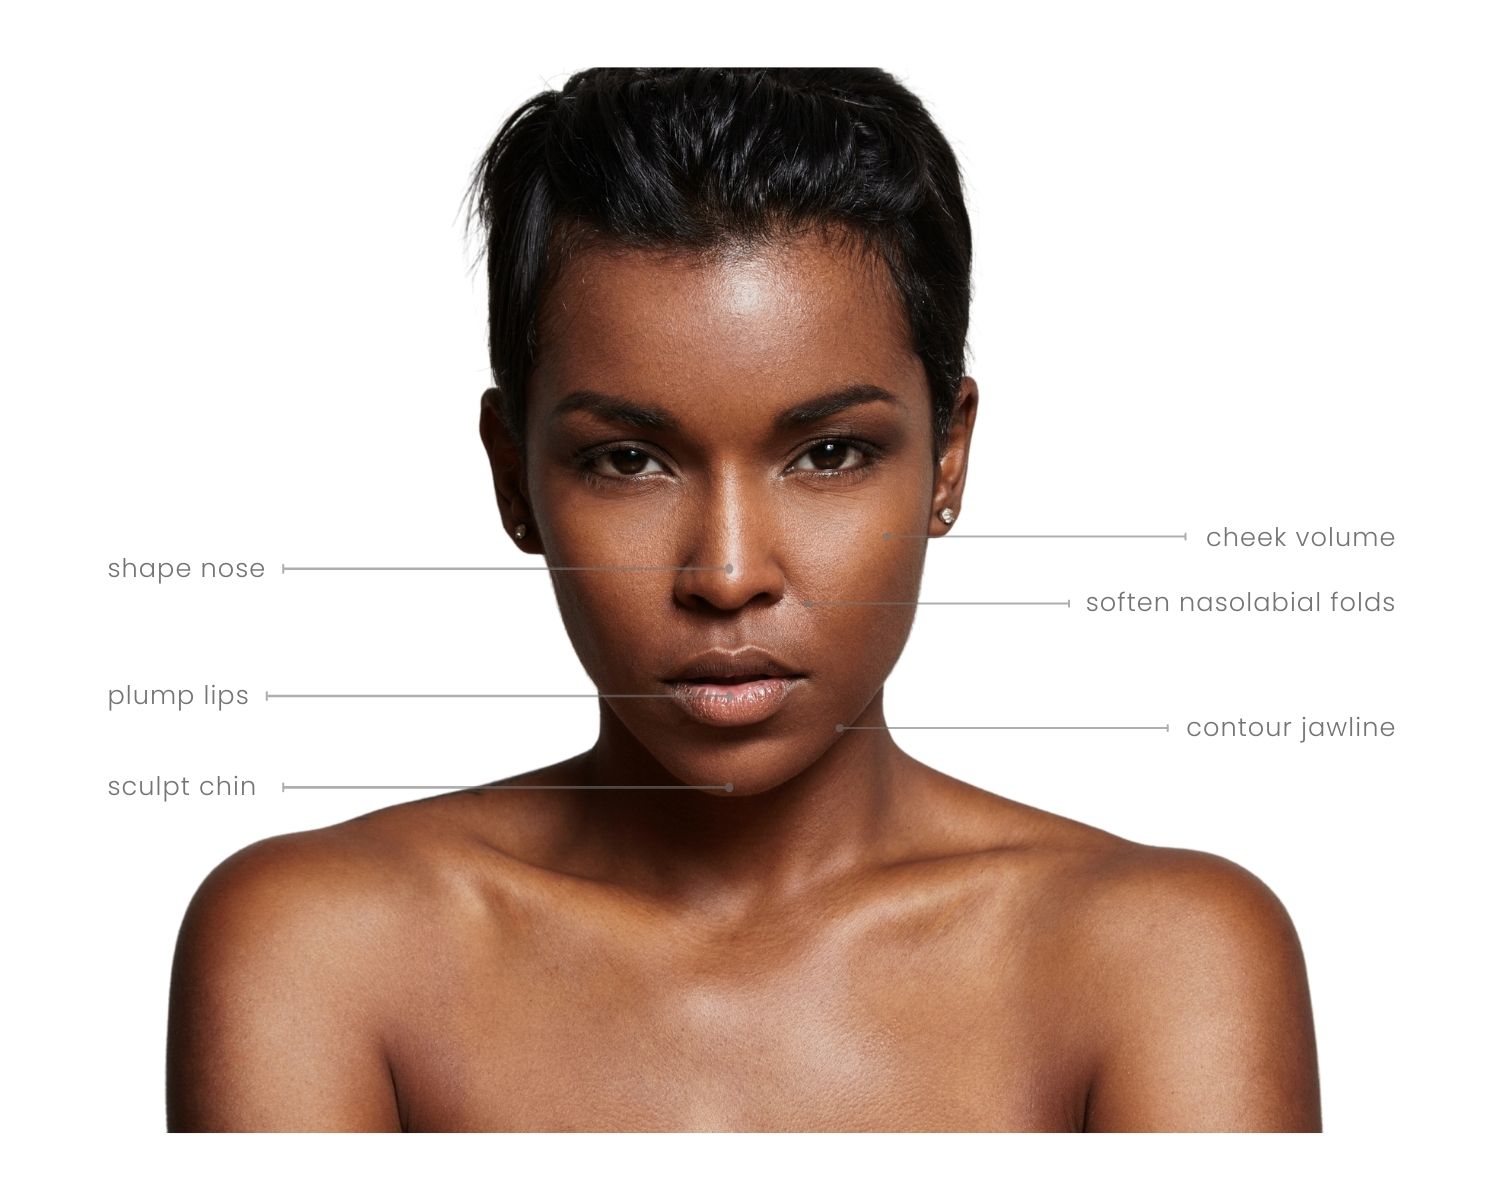 Black woman with short hairstyle looking radiant and youthful with accentuated facial features demonstrating the treatable areas with Dermal Fillers in Westport, CT.